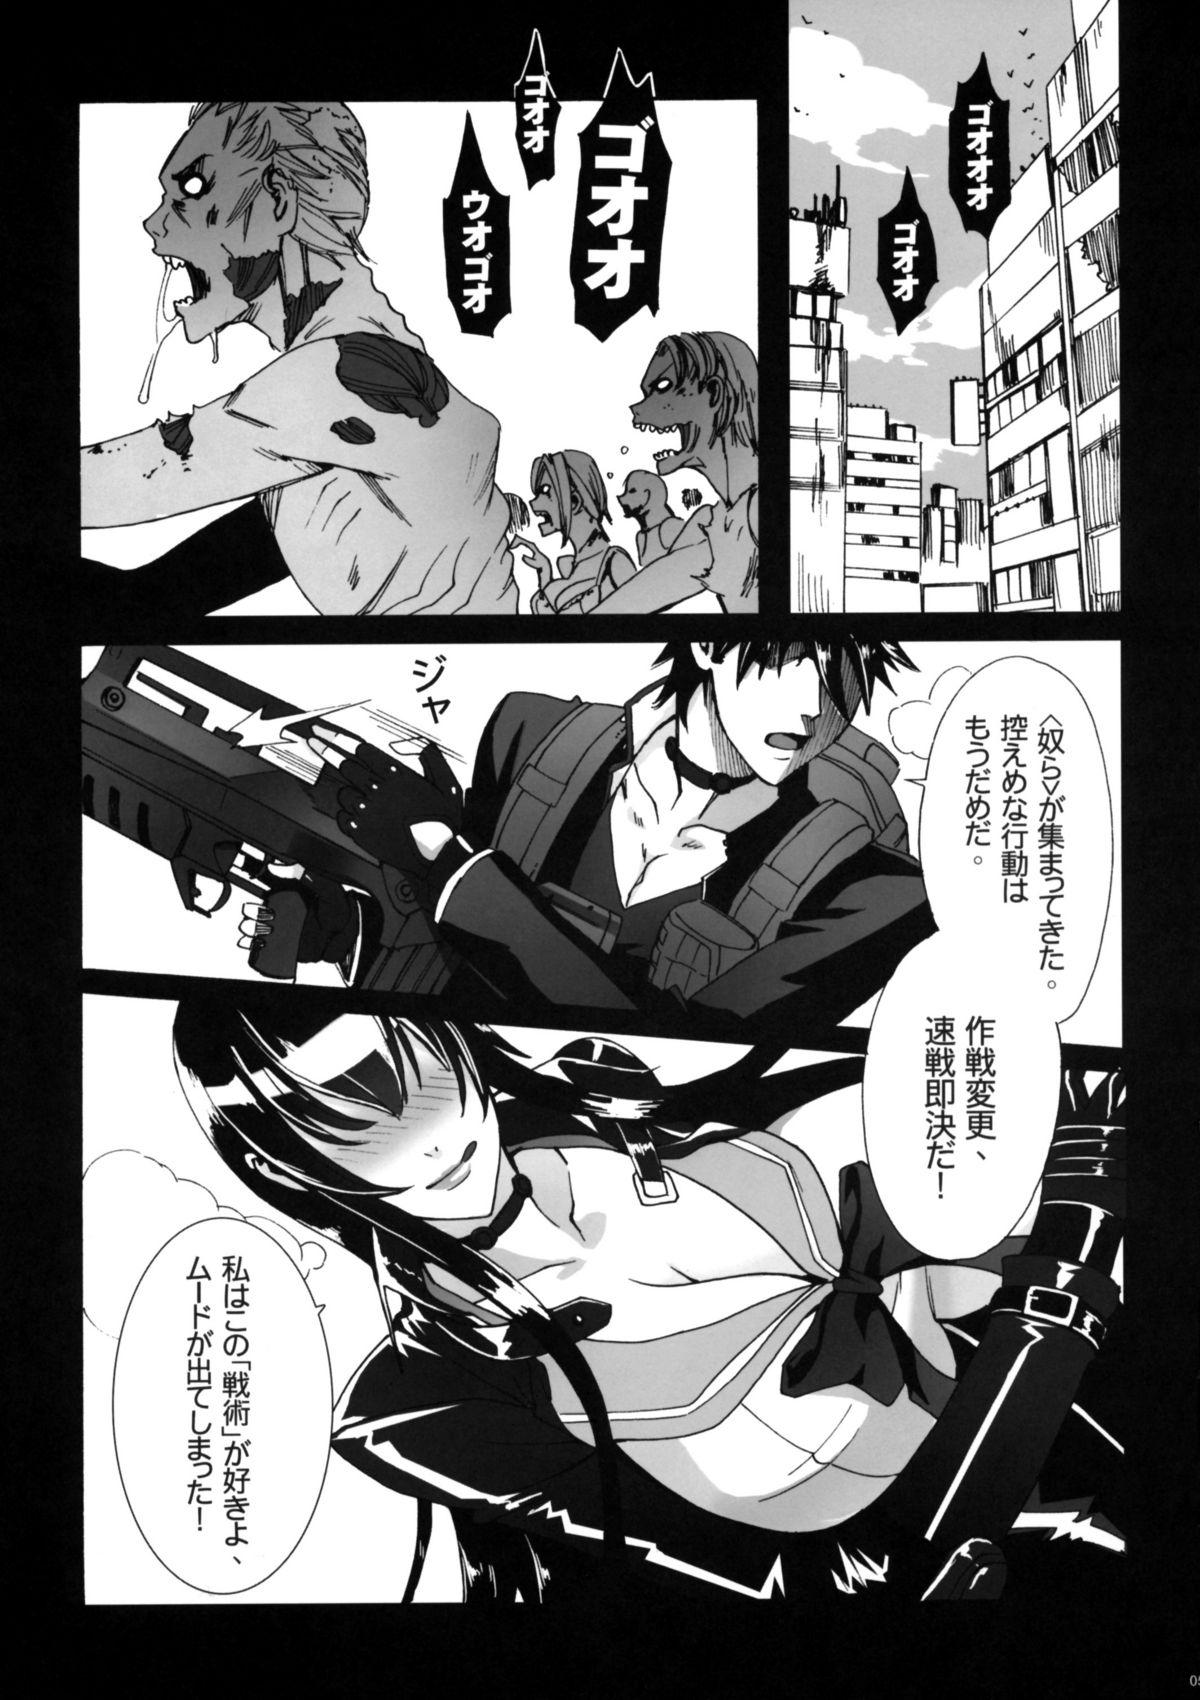 Passionate Kiss of the Dead - Highschool of the dead Chudai - Page 5